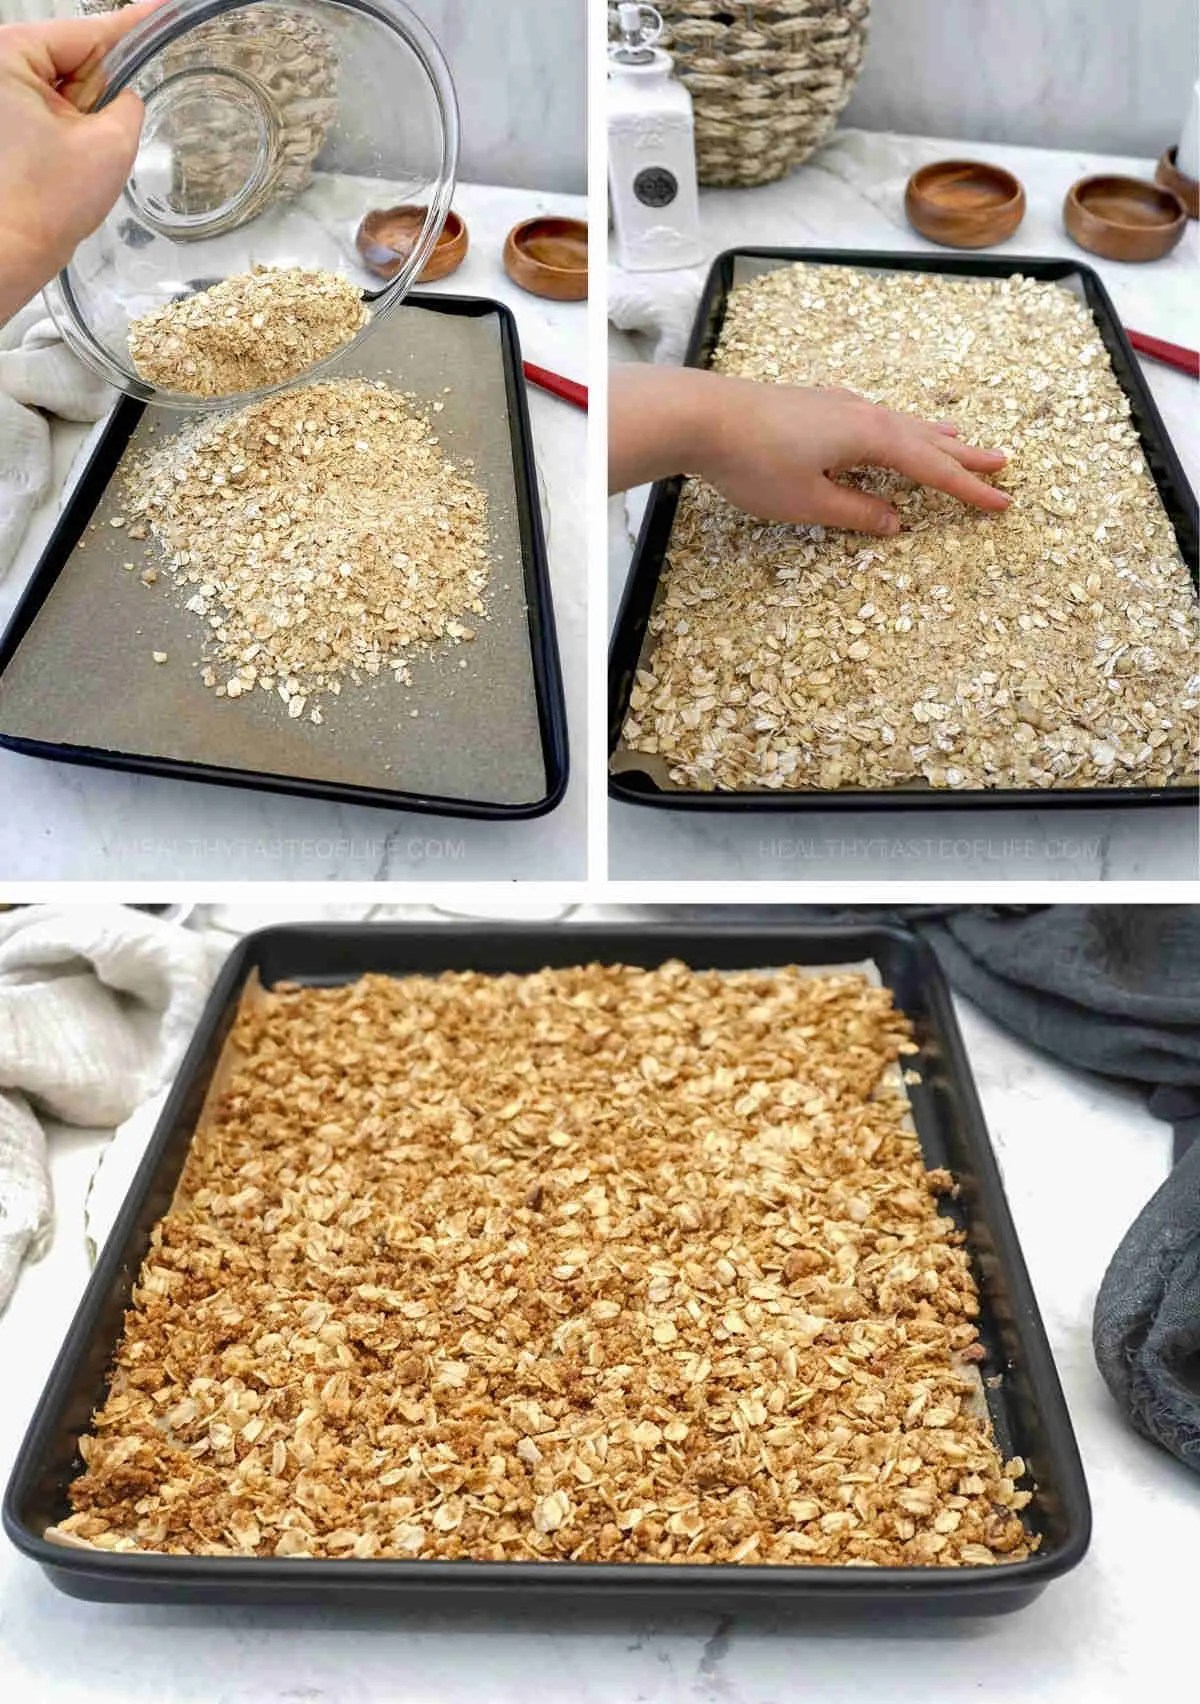 Process shots showing how to make oat topping with crumble and bake it in a single layer on a cookie sheet.